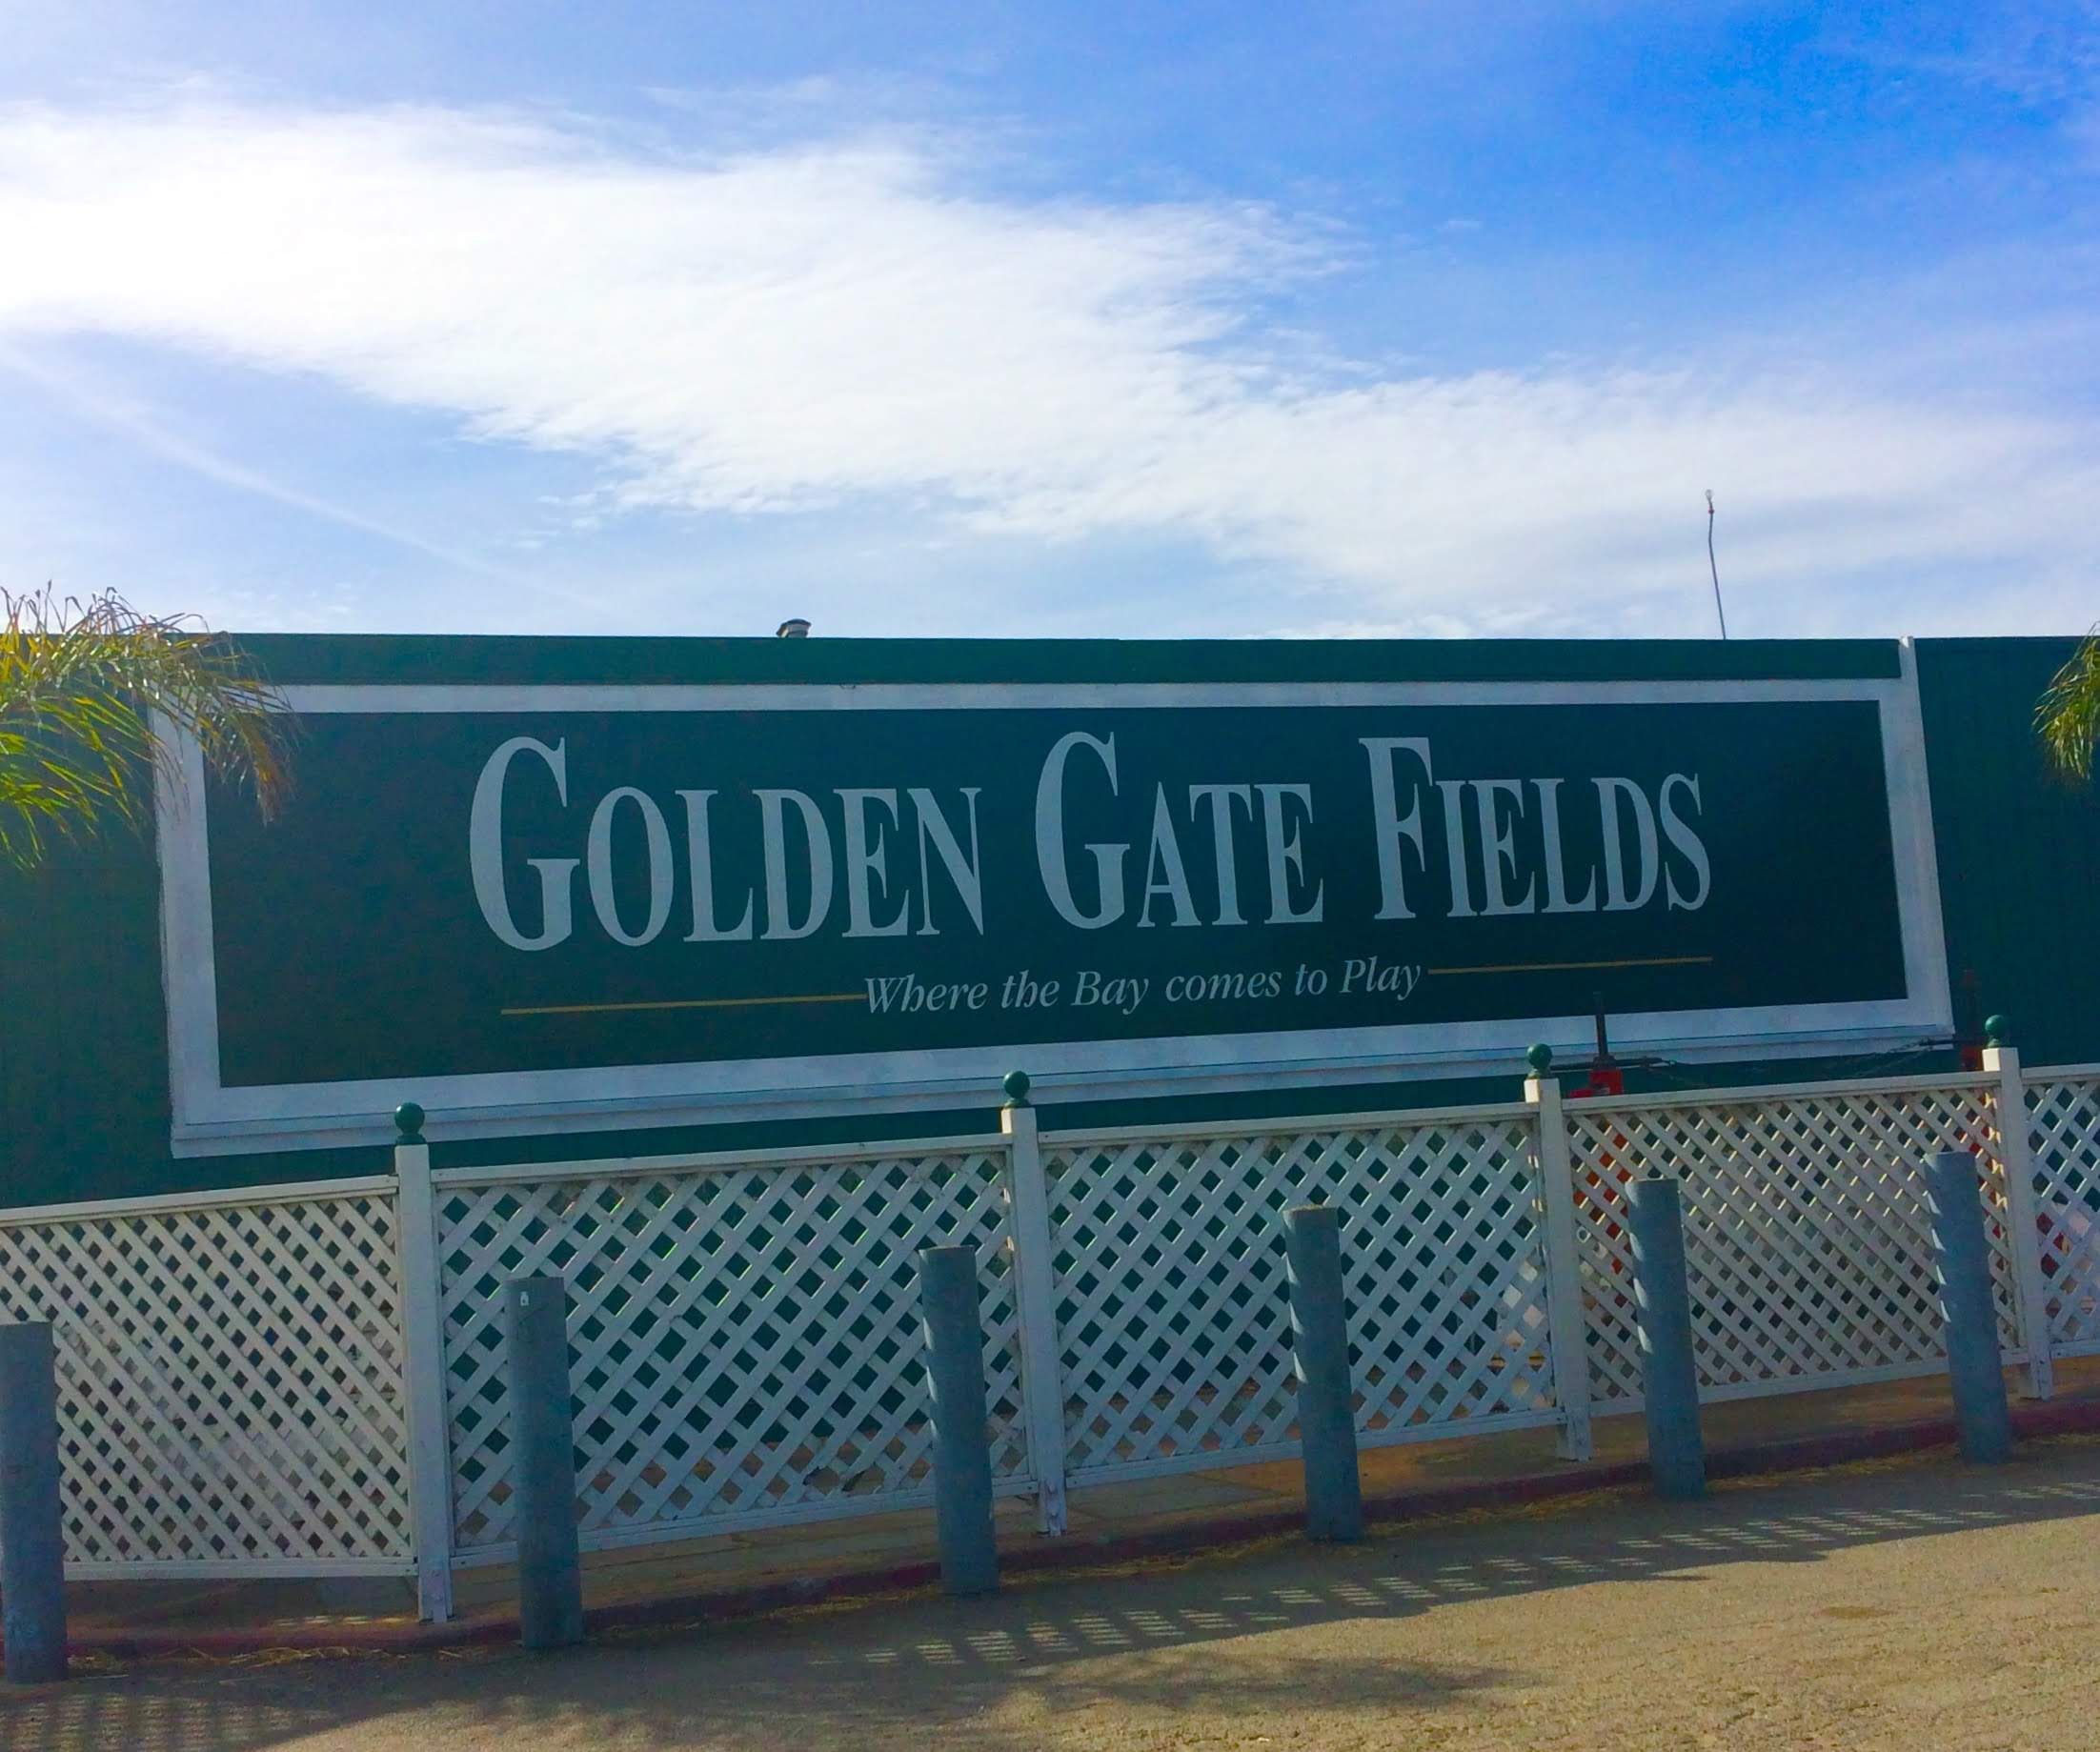 tiny travel chick things to do in the east bay area golden gate fields sign